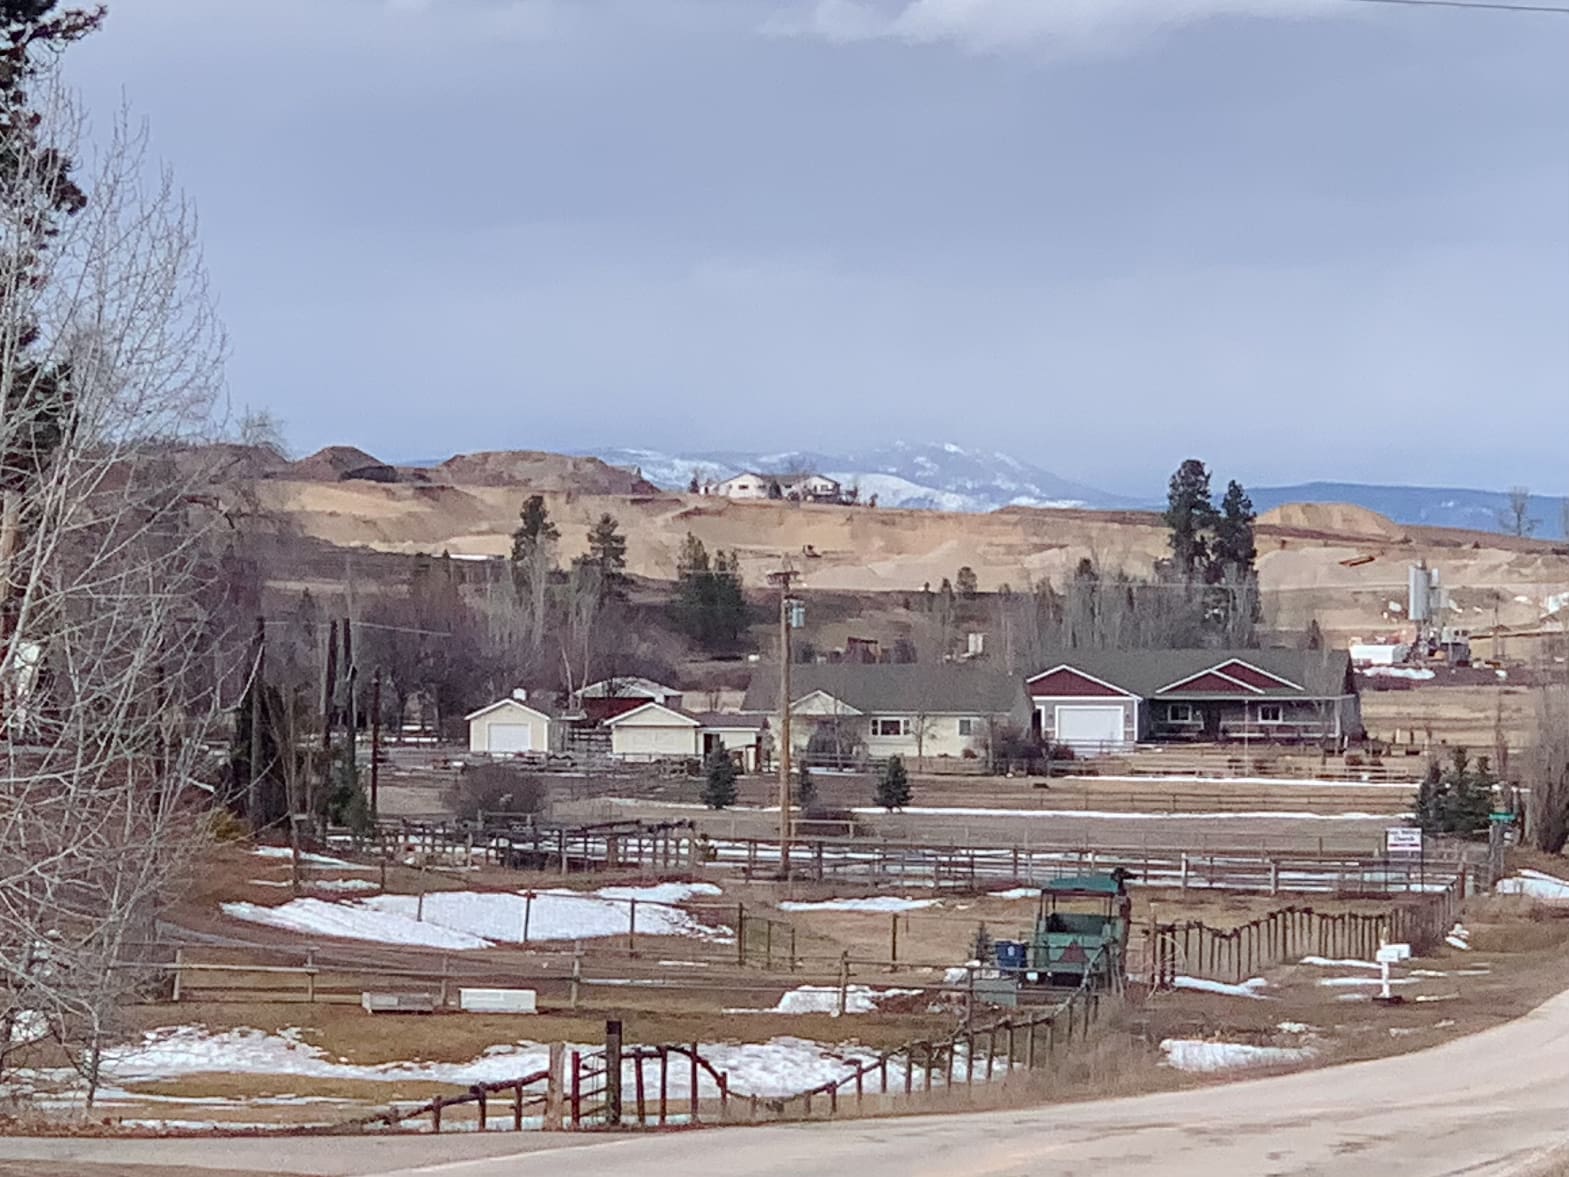 Missoula County holds off on controversial gravel pit decision